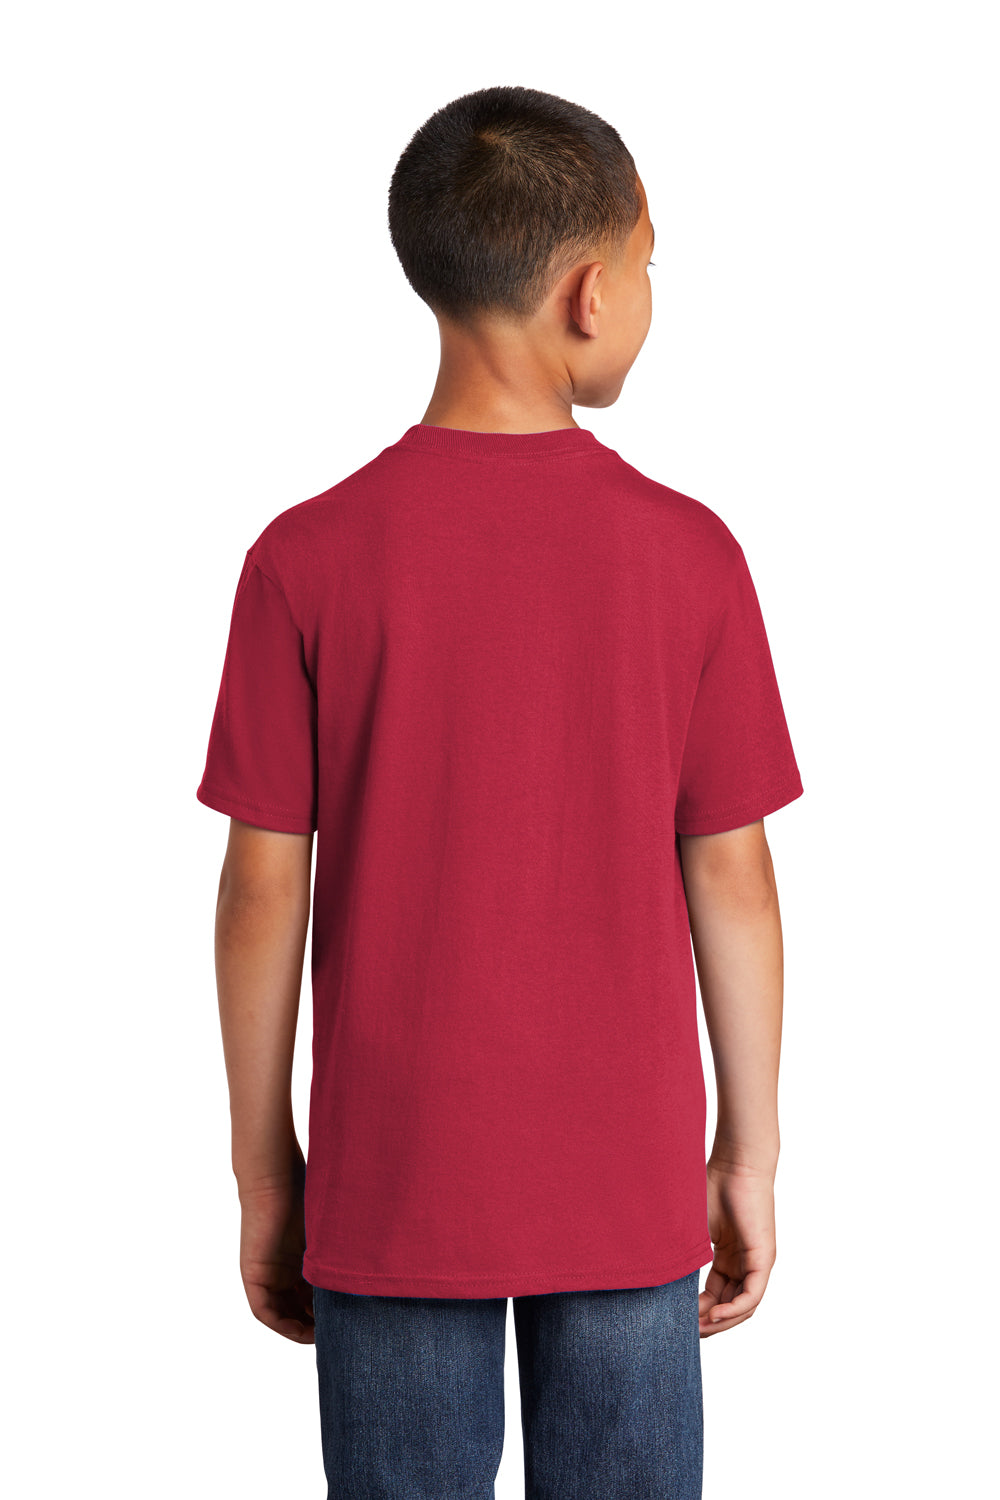 Port & Company PC54Y Youth Core Short Sleeve Crewneck T-Shirt Red Back